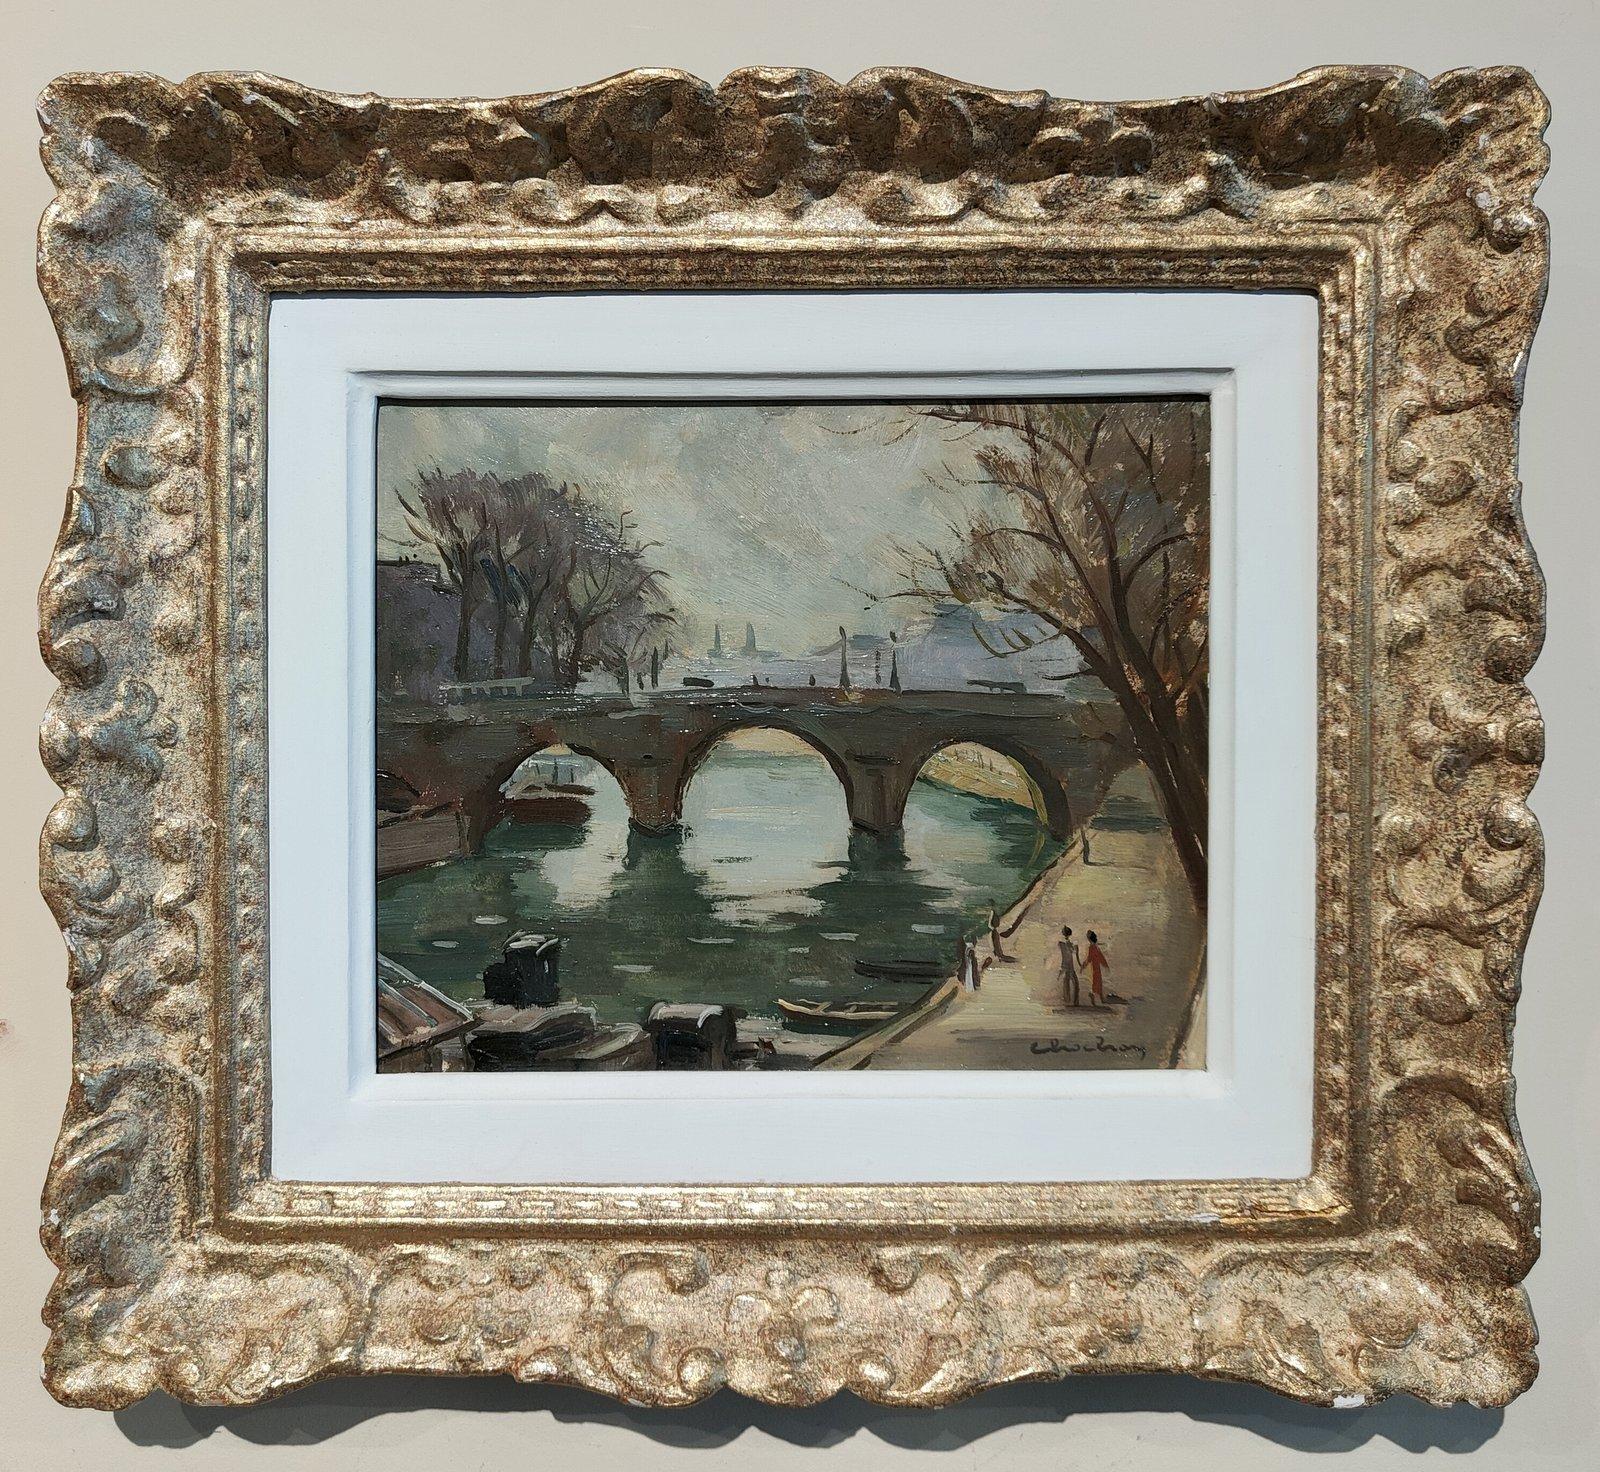 Oil Painting by Andre Eugene Louis Chochon "Bridge over the Seine" 1910 -2005 Studied Beaux Arts in Reines then exhibited at the society des Artistes. Francois from 1933, Grand Prix de Rome 1938, represented Poidou centre and Rees A.G. Oil on board